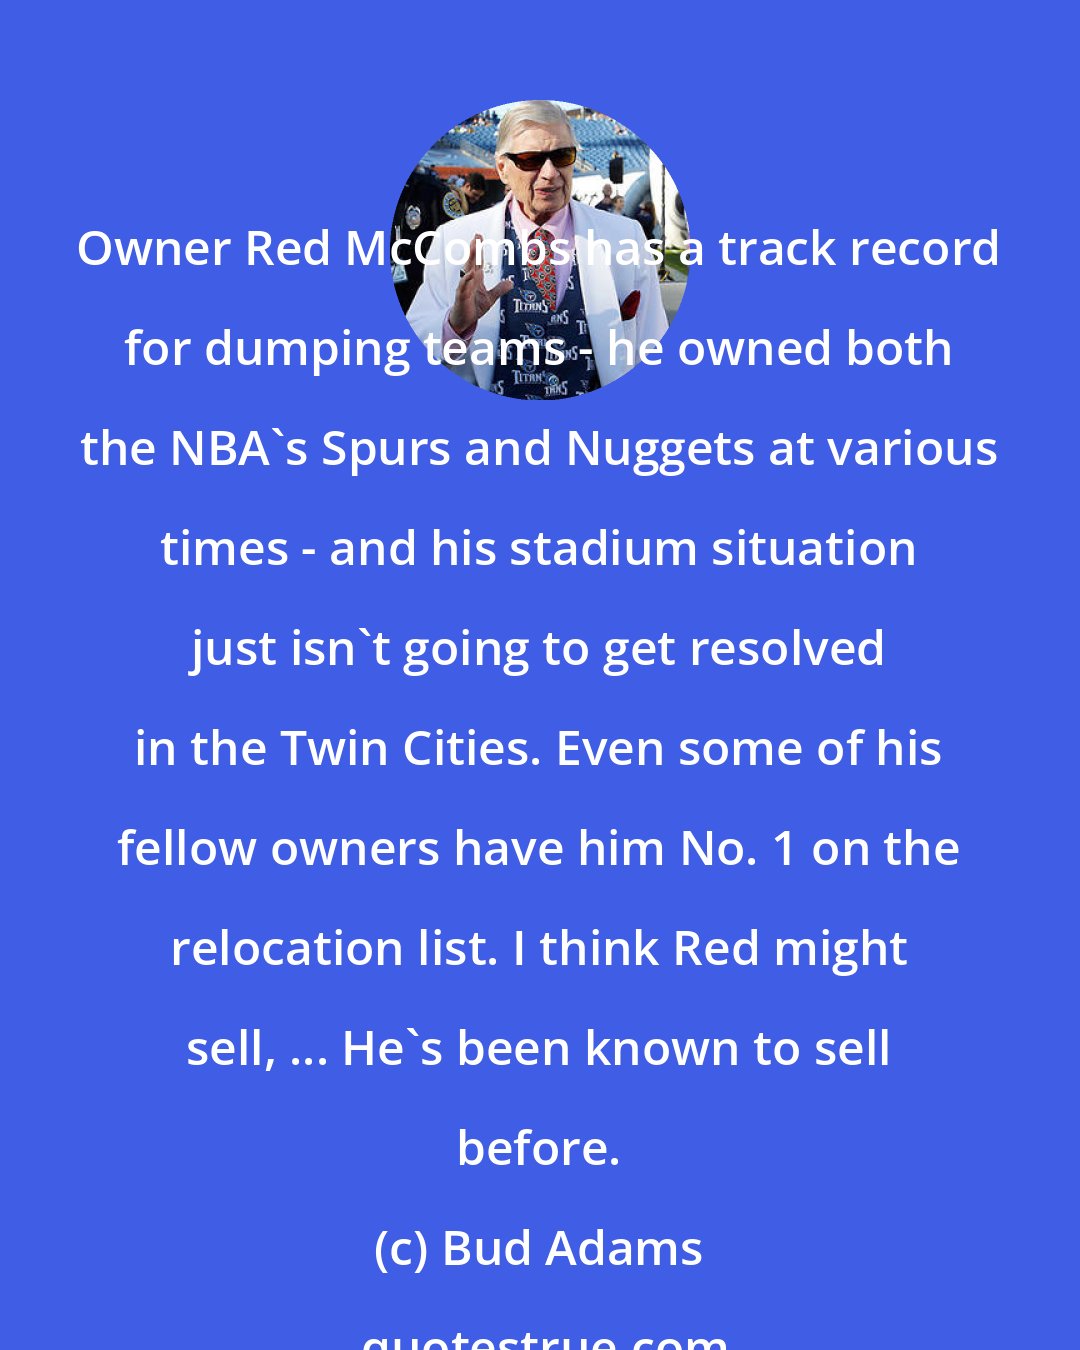 Bud Adams: Owner Red McCombs has a track record for dumping teams - he owned both the NBA's Spurs and Nuggets at various times - and his stadium situation just isn't going to get resolved in the Twin Cities. Even some of his fellow owners have him No. 1 on the relocation list. I think Red might sell, ... He's been known to sell before.